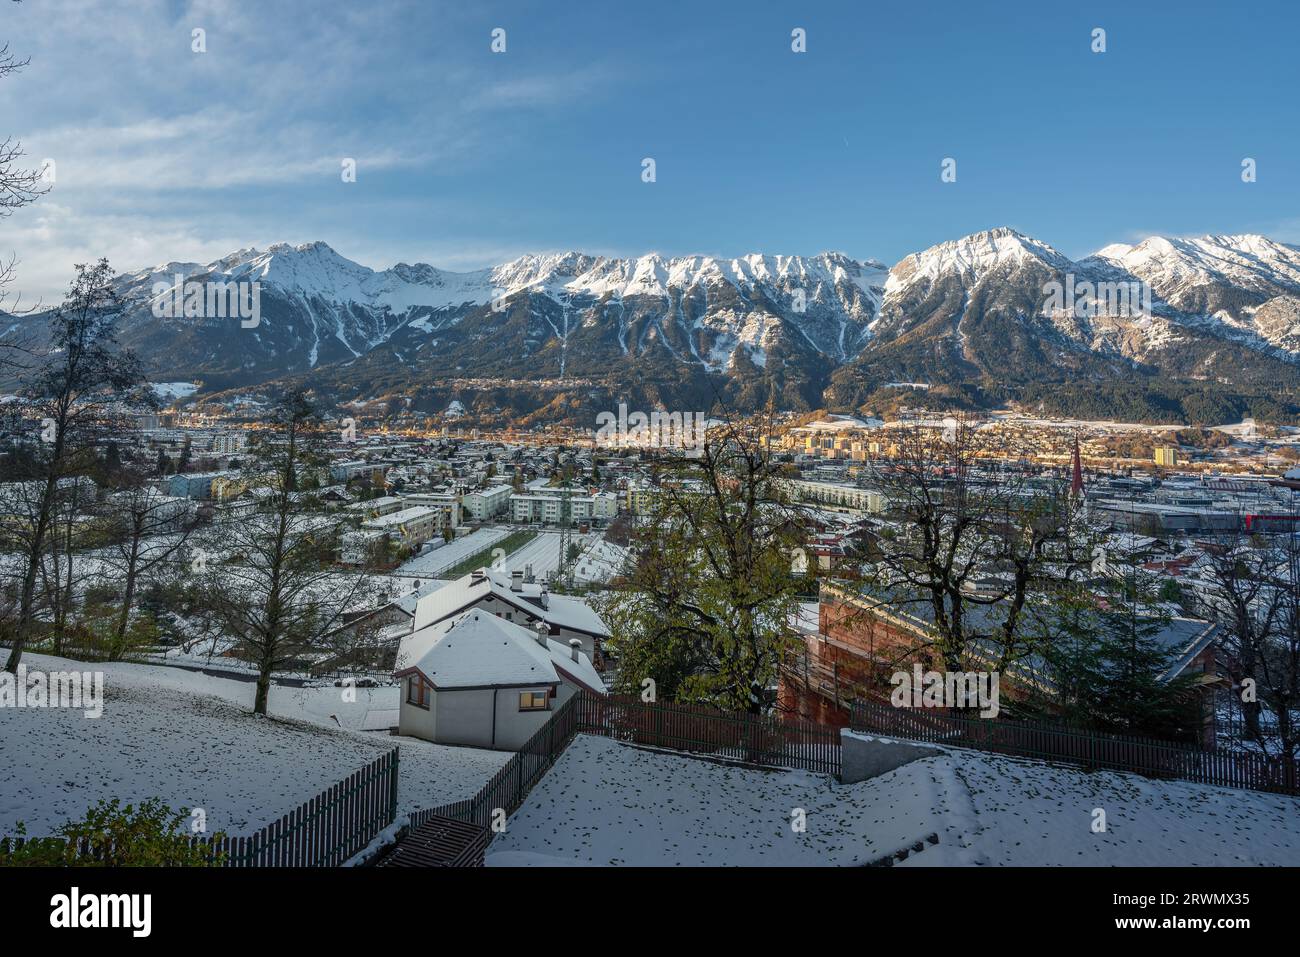 View of Innsbruck with snow and Karwendel Alps Mountains - Innsbruck, Austria Stock Photo